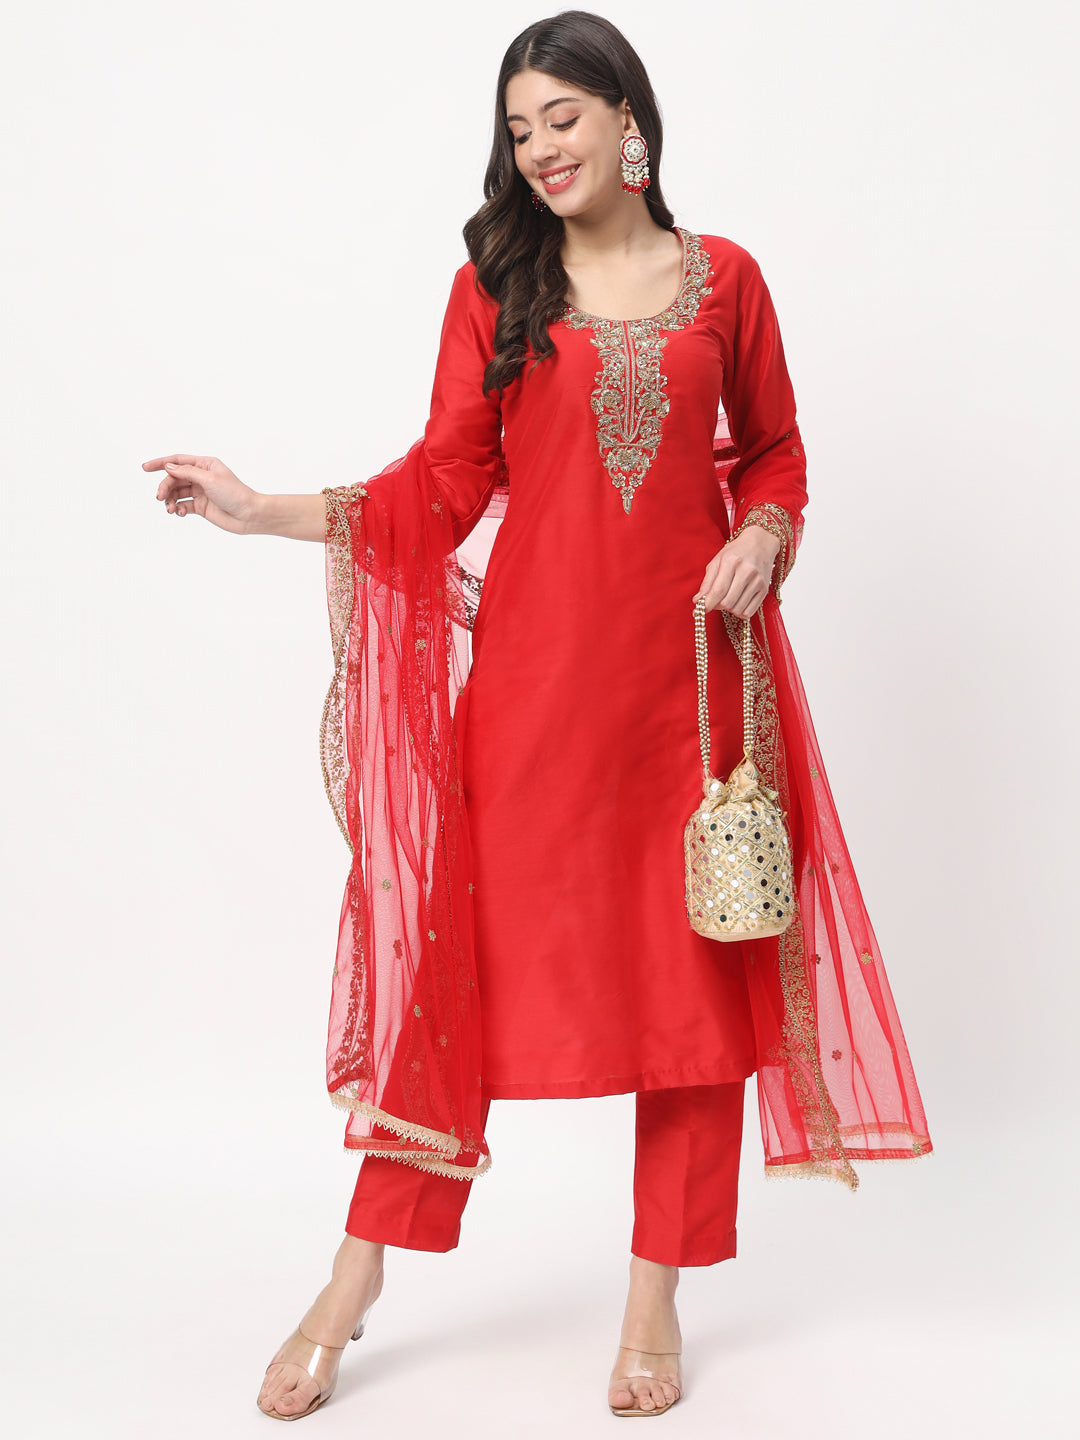 Buy Clickedia Womens Fully Stitched Rayon Embellished Straight Kurti with  Tassels, Lace and Cotton Dupatta with Pants Jaipuri Salwar Suit at Amazon.in